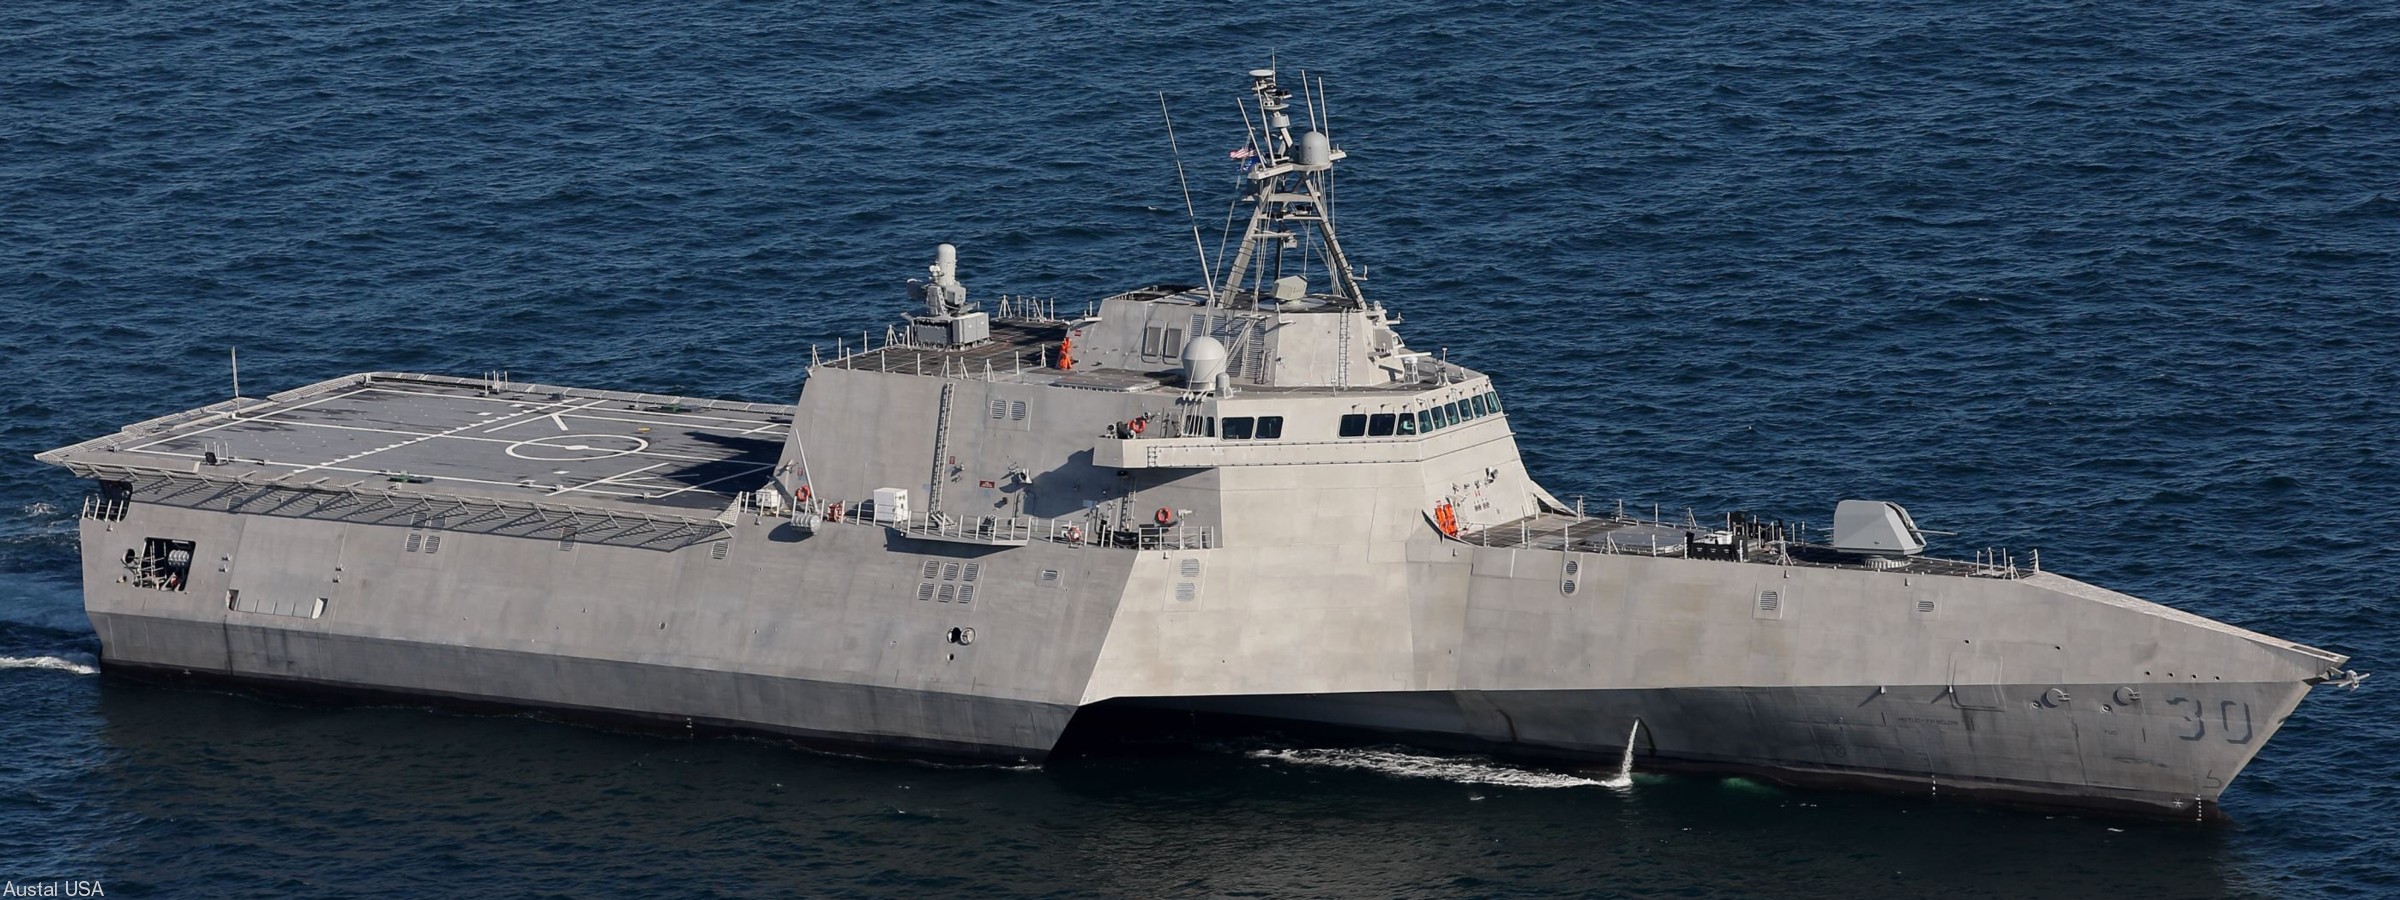 lcs-30 uss canberra littoral combat ship independence class us navy trials austal 07